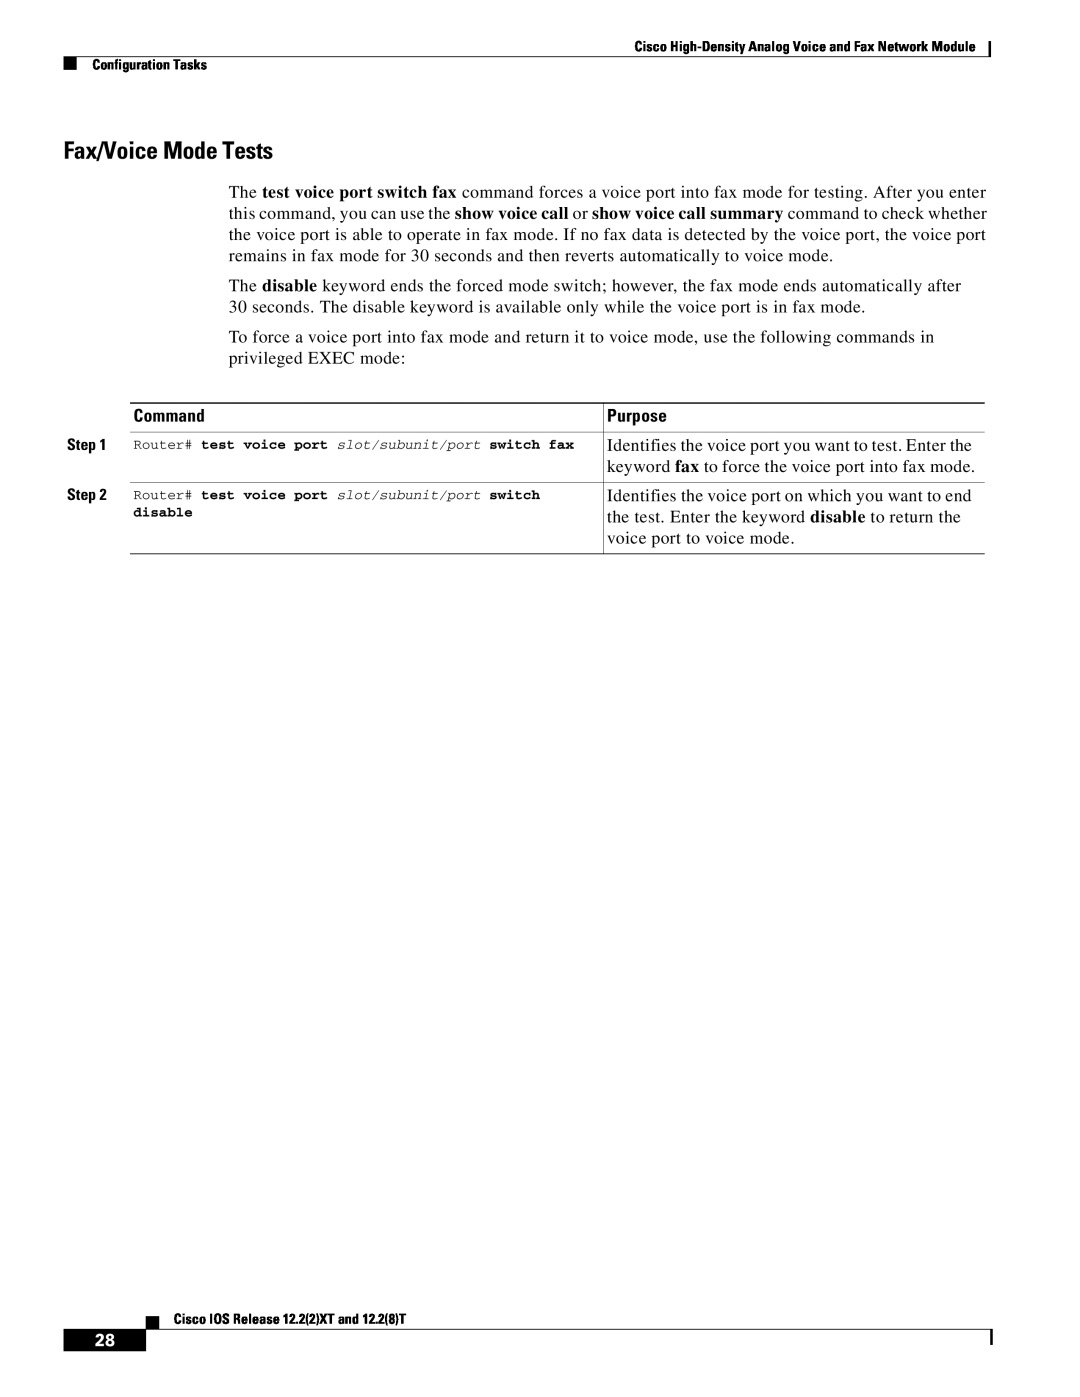 Weed Eater 2600 manual Fax/Voice Mode Tests, Command, Purpose 